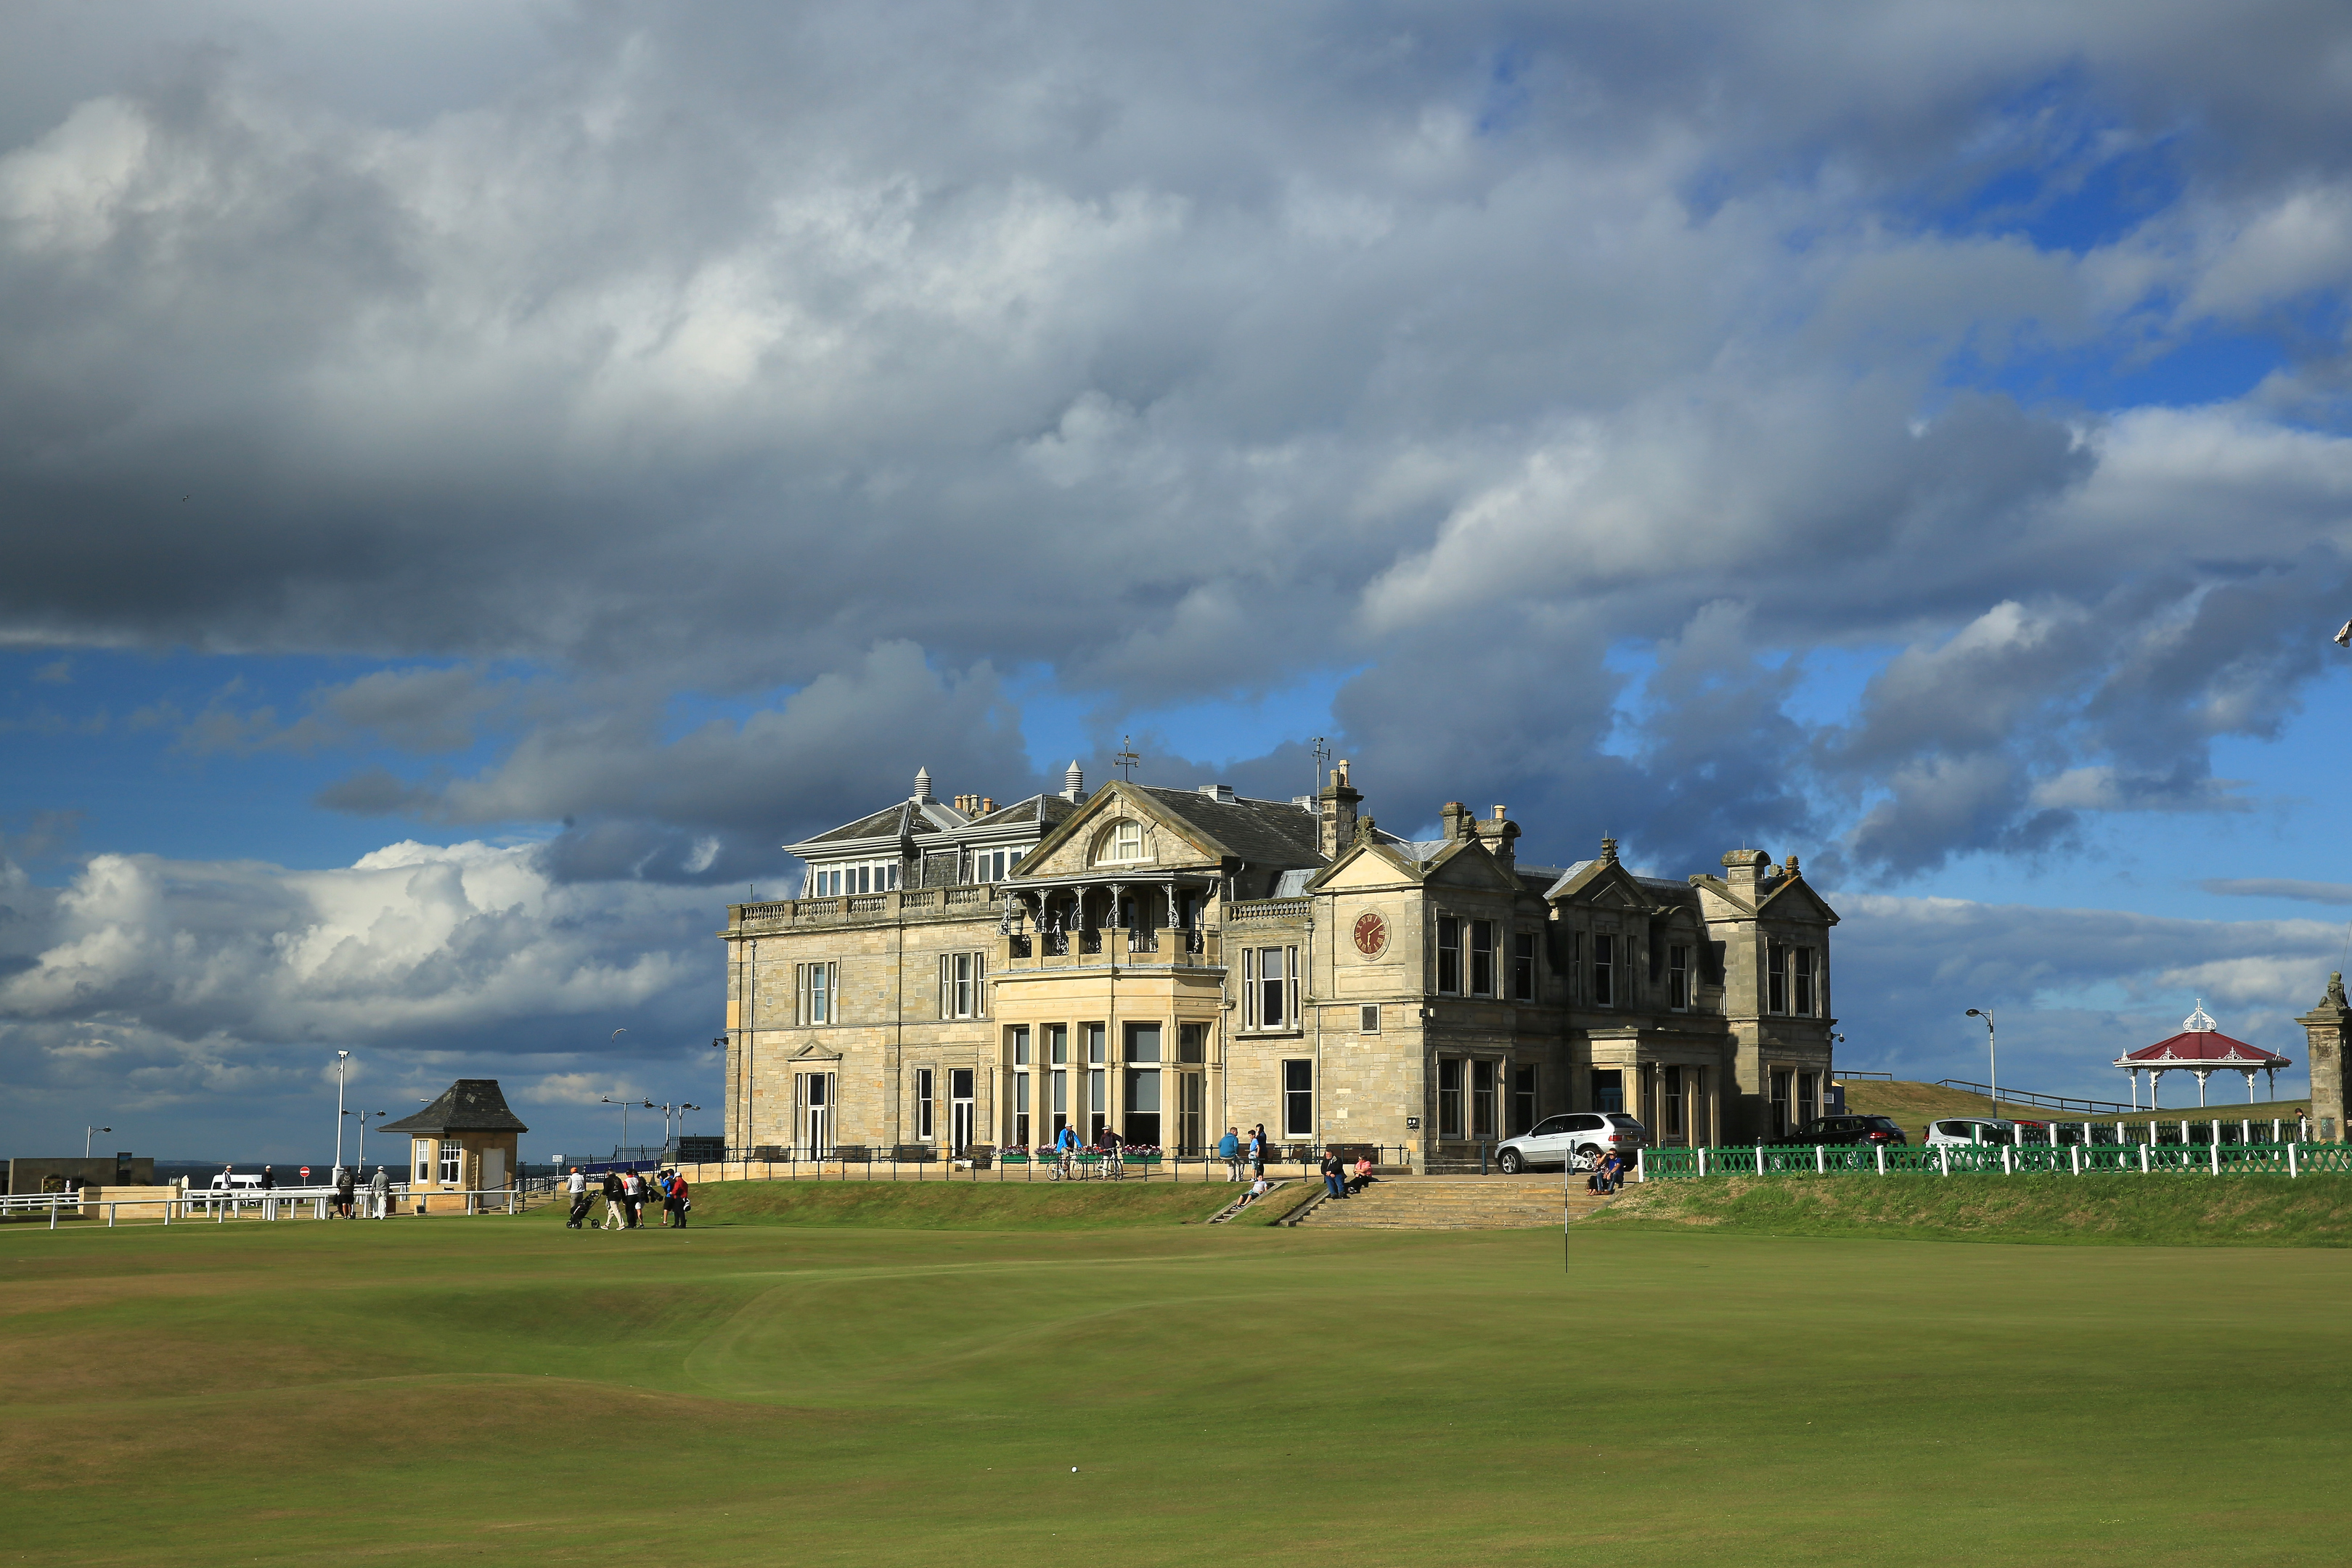 The Open is set to return to St Andrews for the 150th staging in 2021.